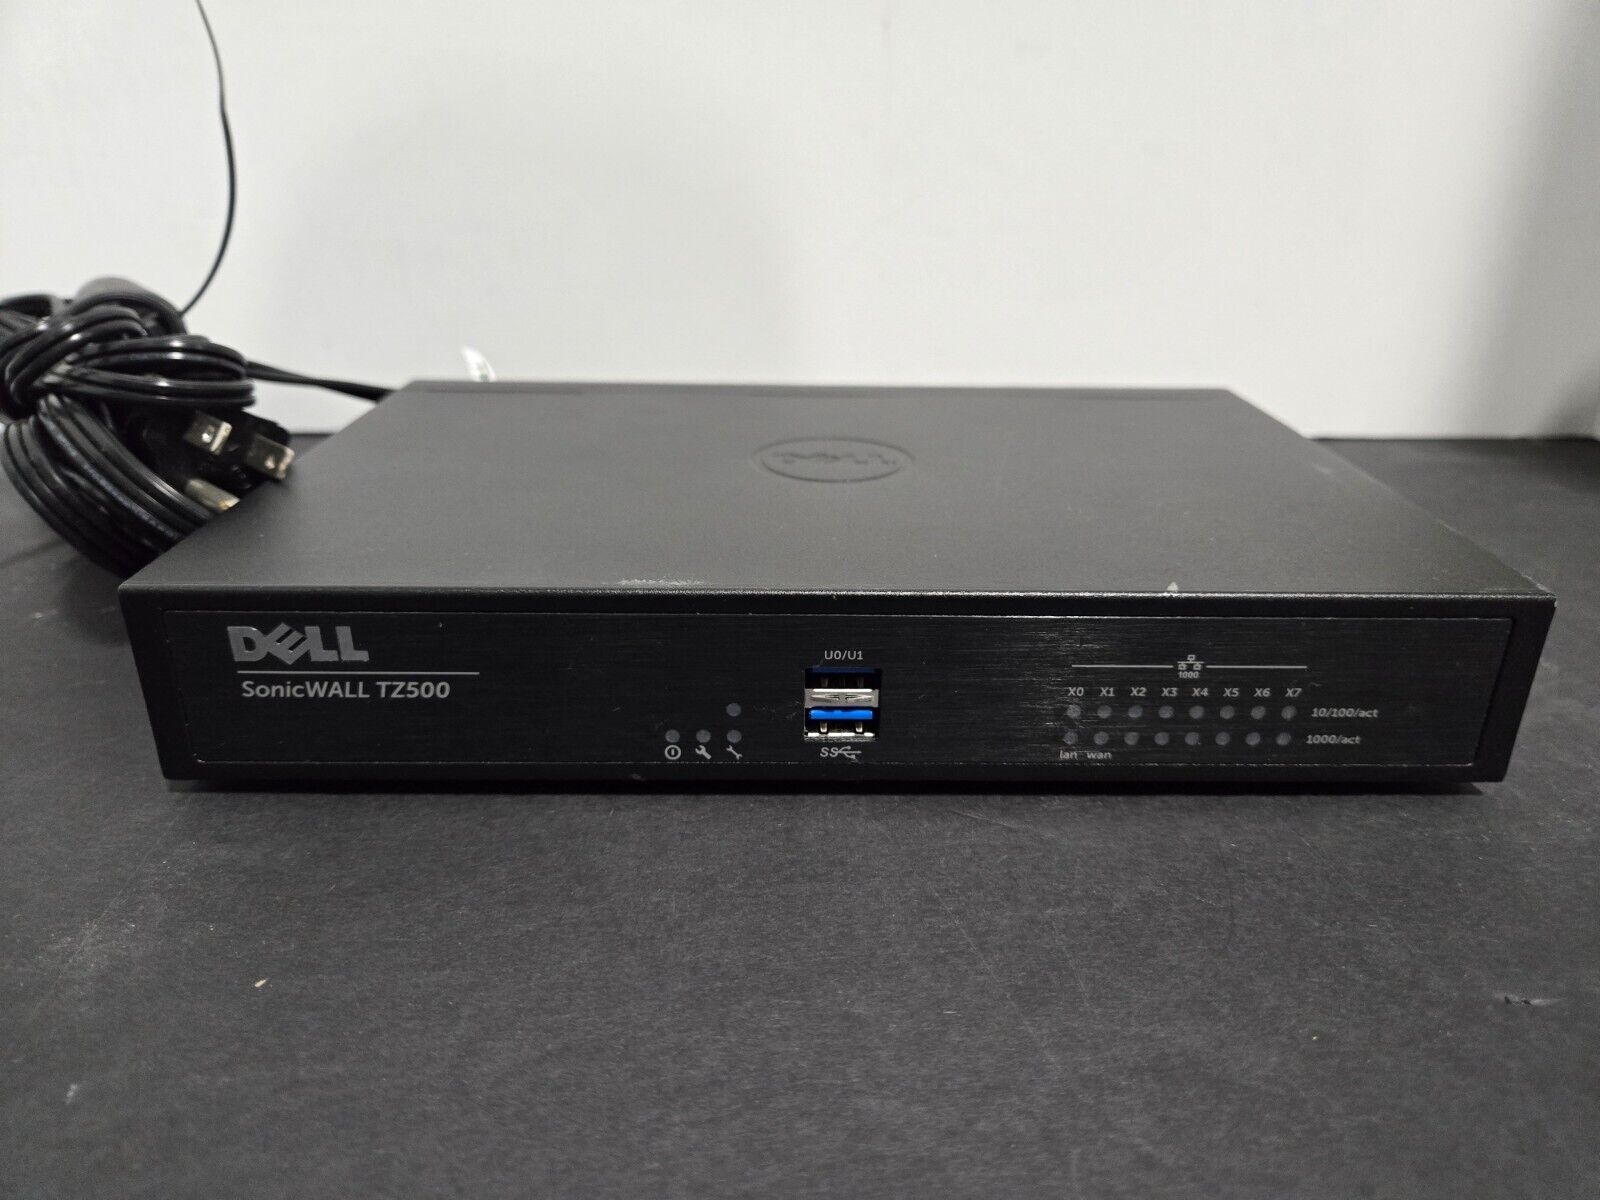 Dell SonicWALL TZ500 Firewall 8-Port Network Security Appliance APL29-0B6